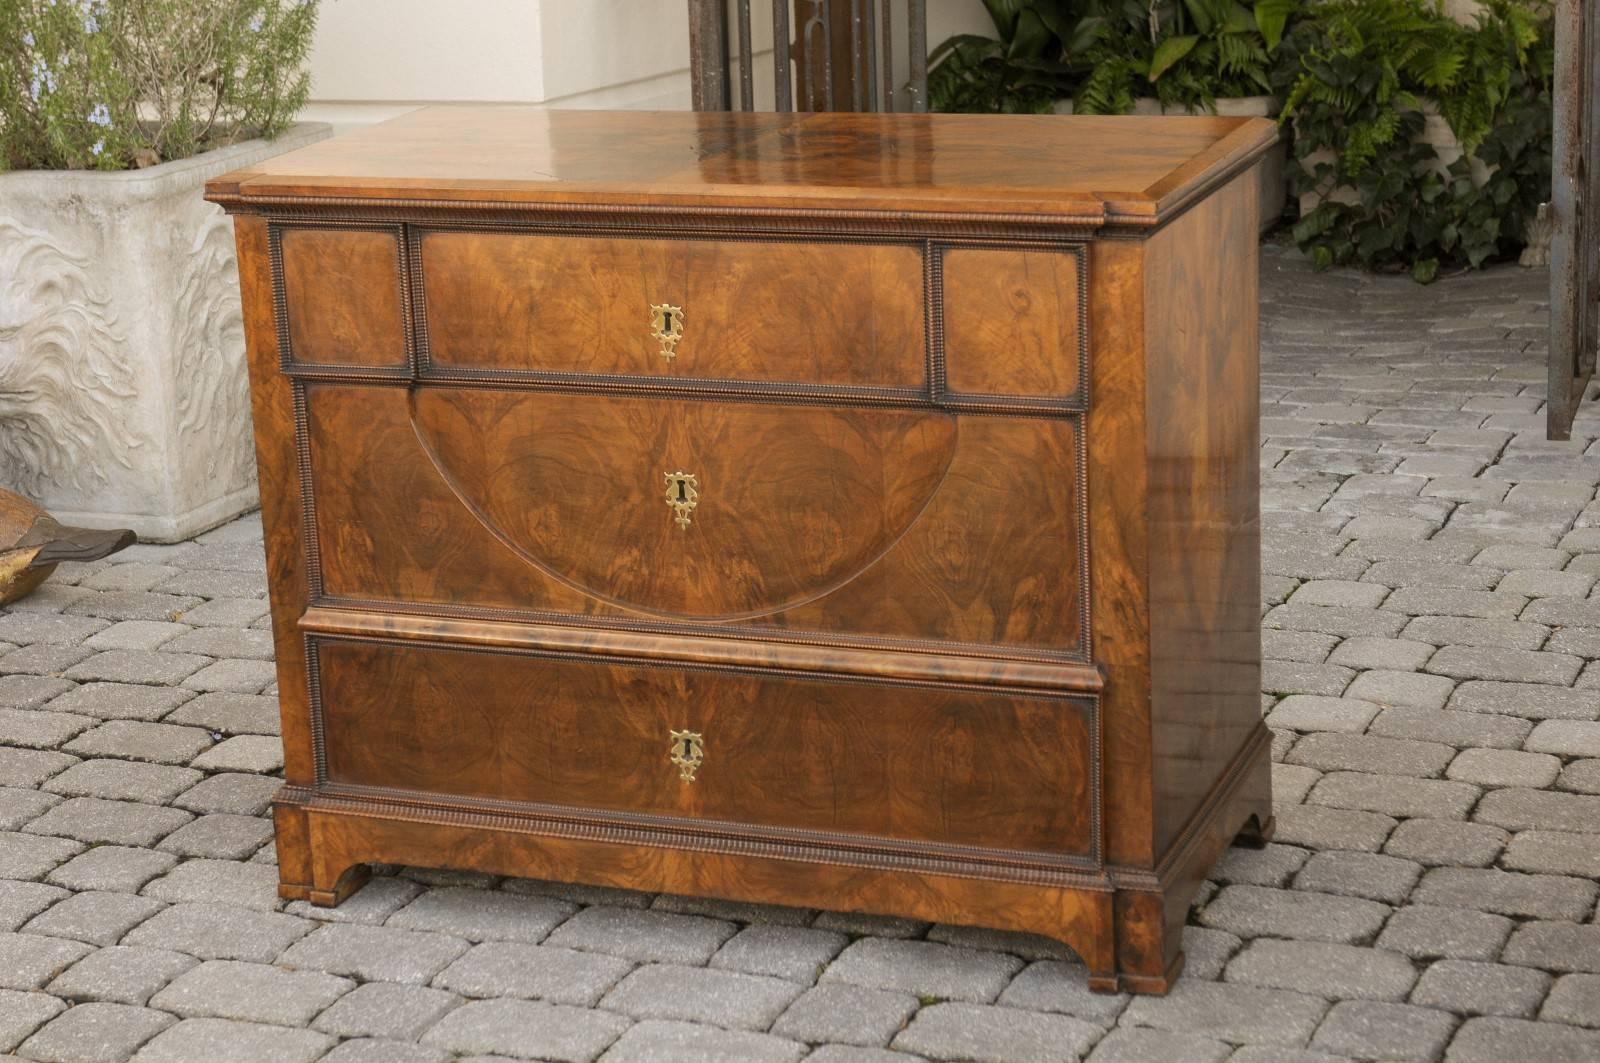 An Austrian mid-19th century Biedermeier commode. This Austrian wooden chest from circa 1840 features three drawers with central escutcheons. In typical Biedermeier fashion, the top drawer is adorned with geometrical motifs with a nicely carved